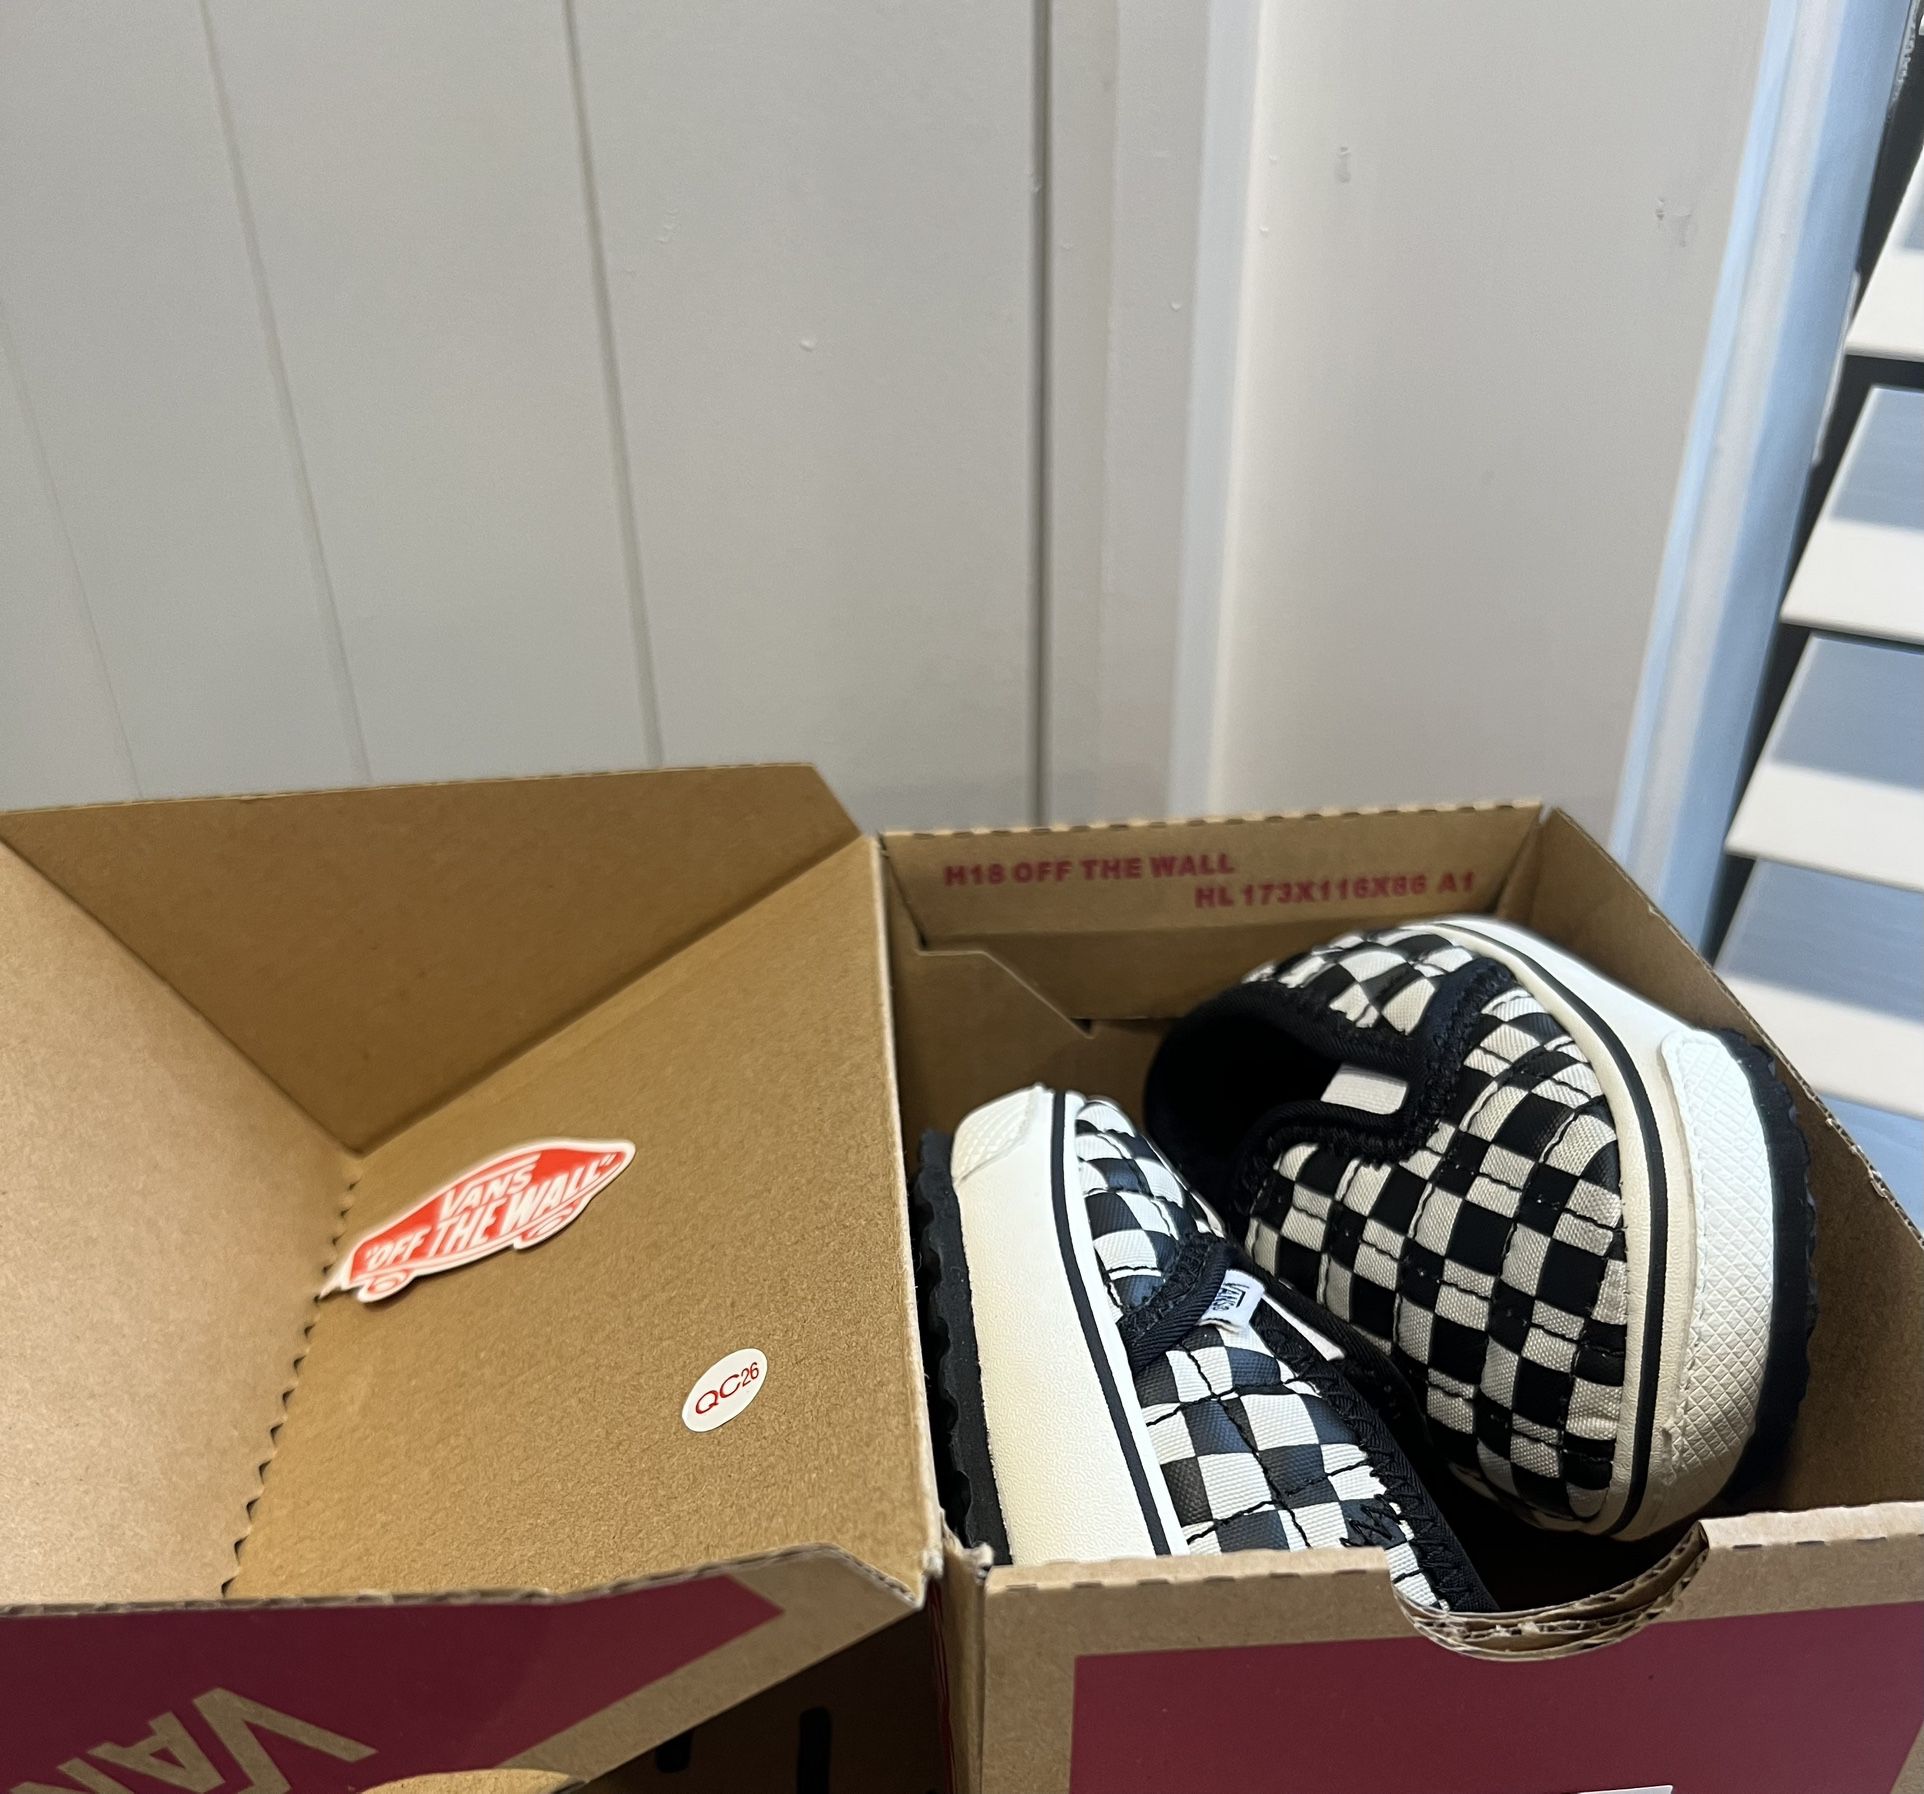 New Baby Checkered Vans Shoes 